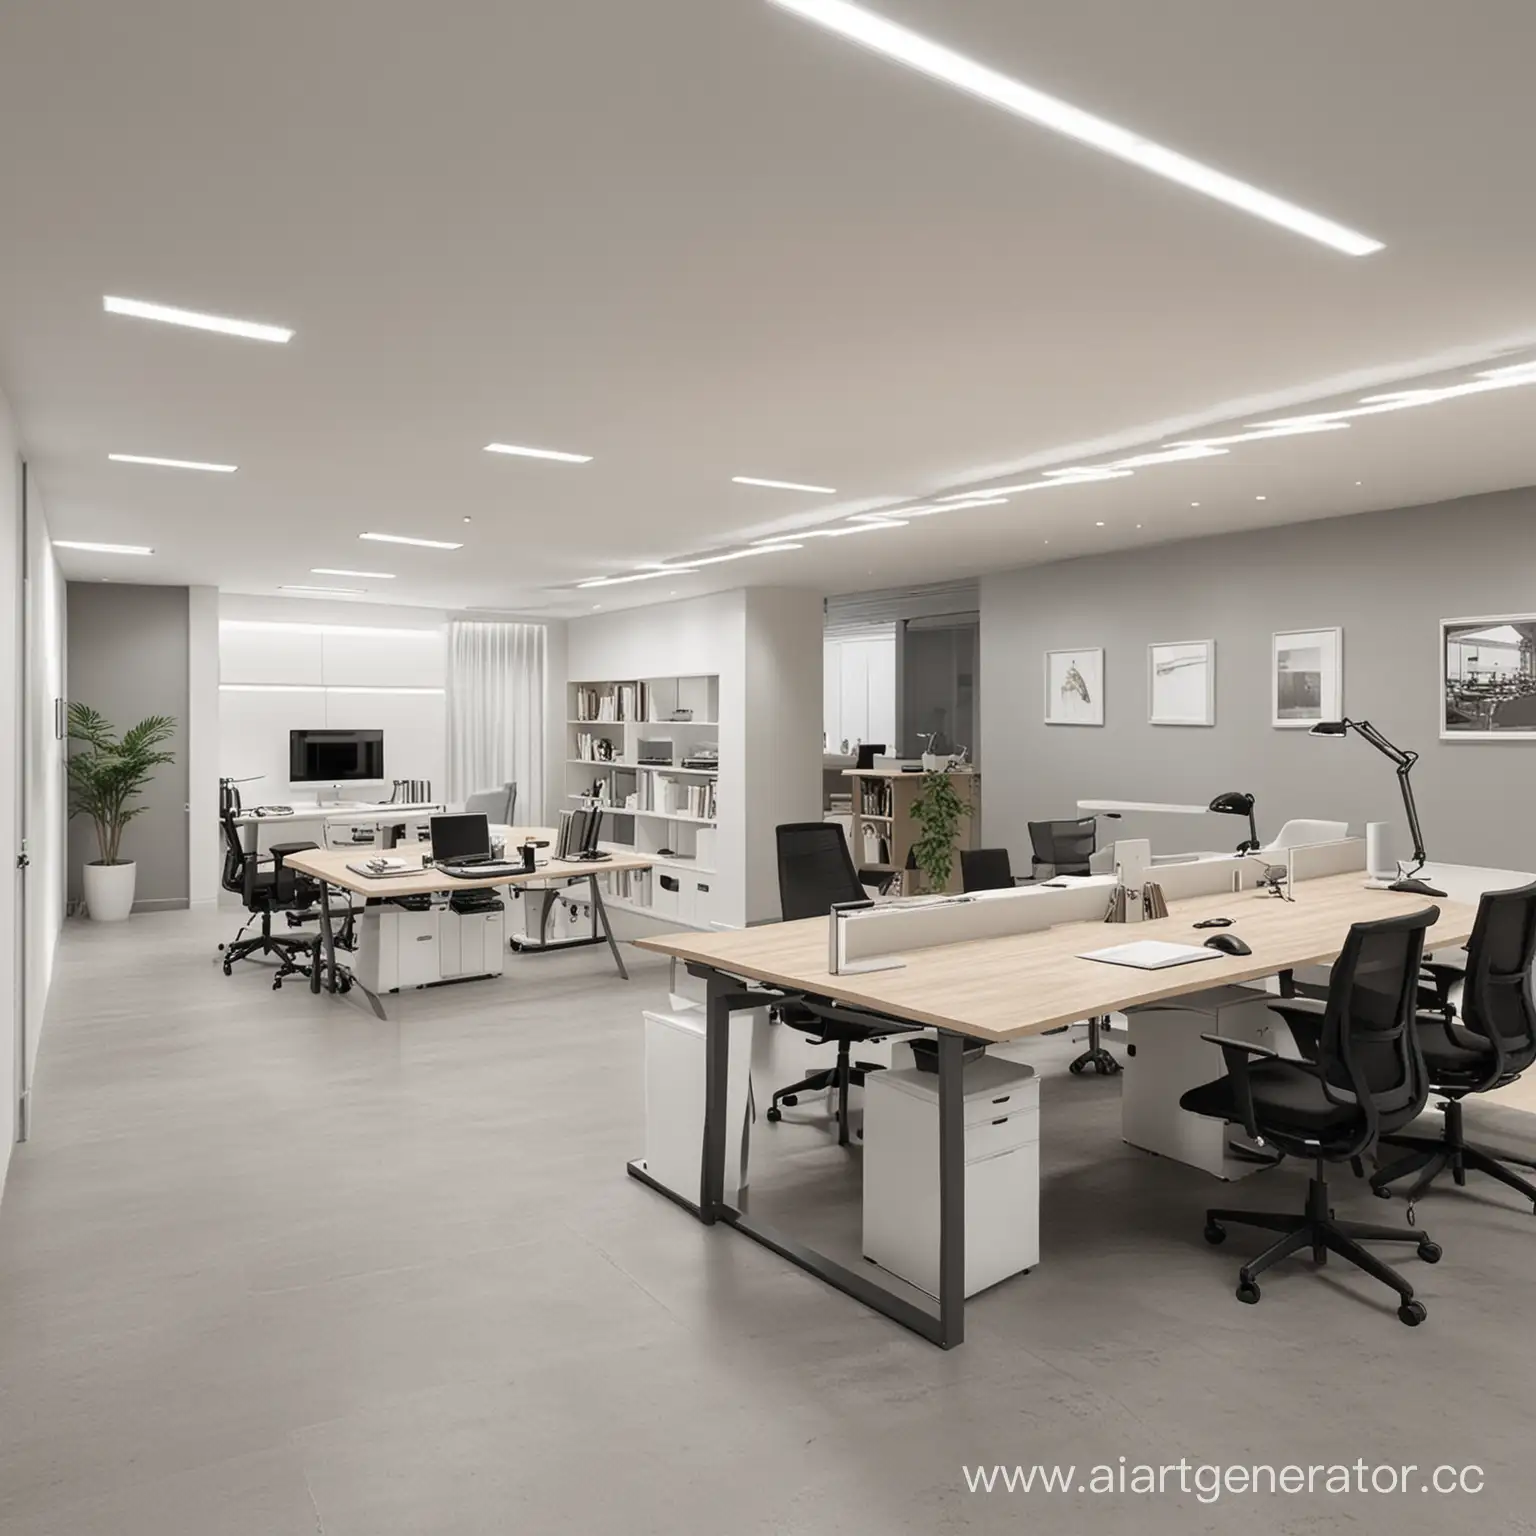 SidebySide-Comparison-of-Traditional-and-Modern-Office-Spaces